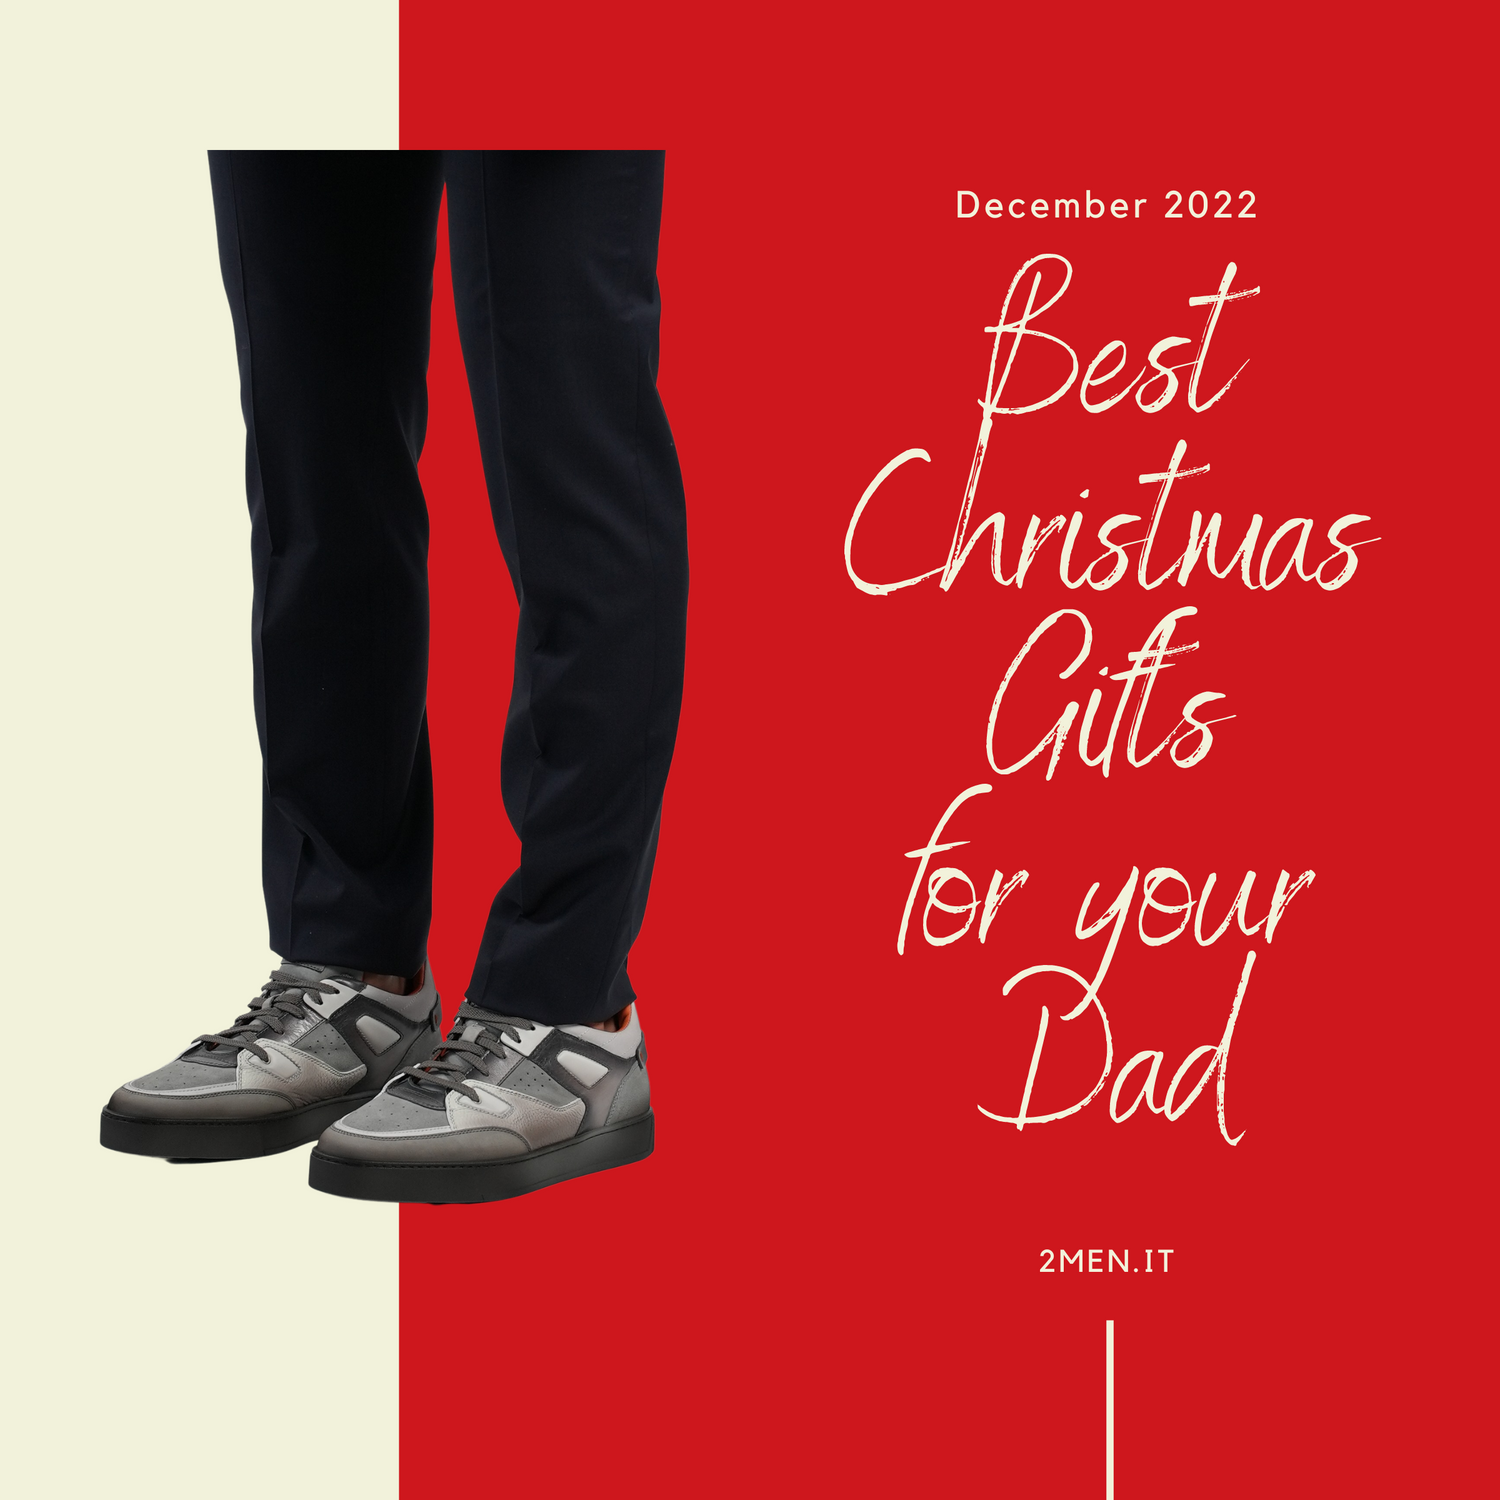 Best Christmas Gifts for your Dad